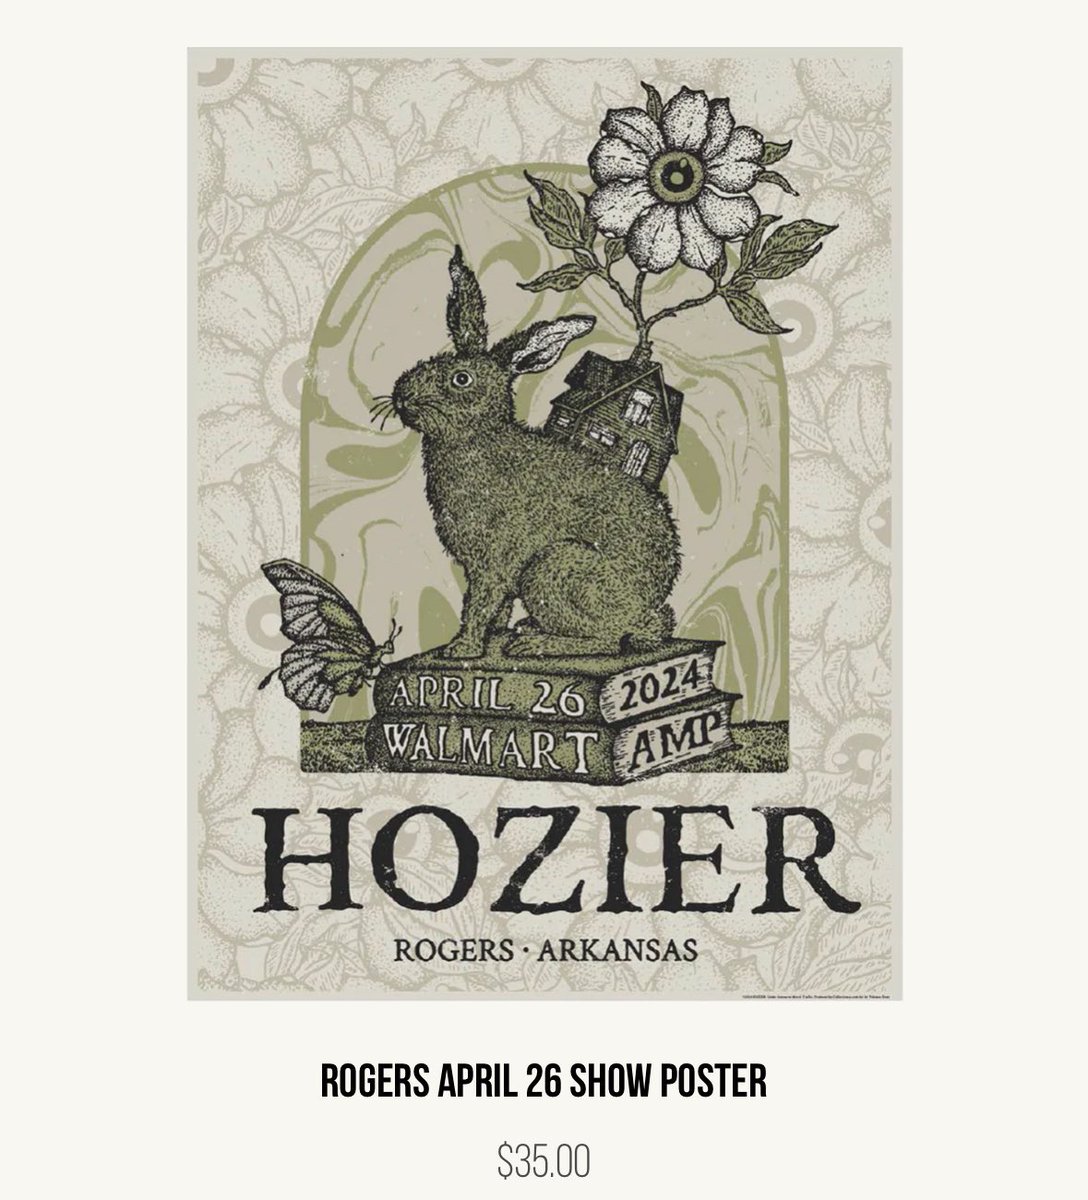 WALMART being printed on tonight’s Hozier show poster 😭